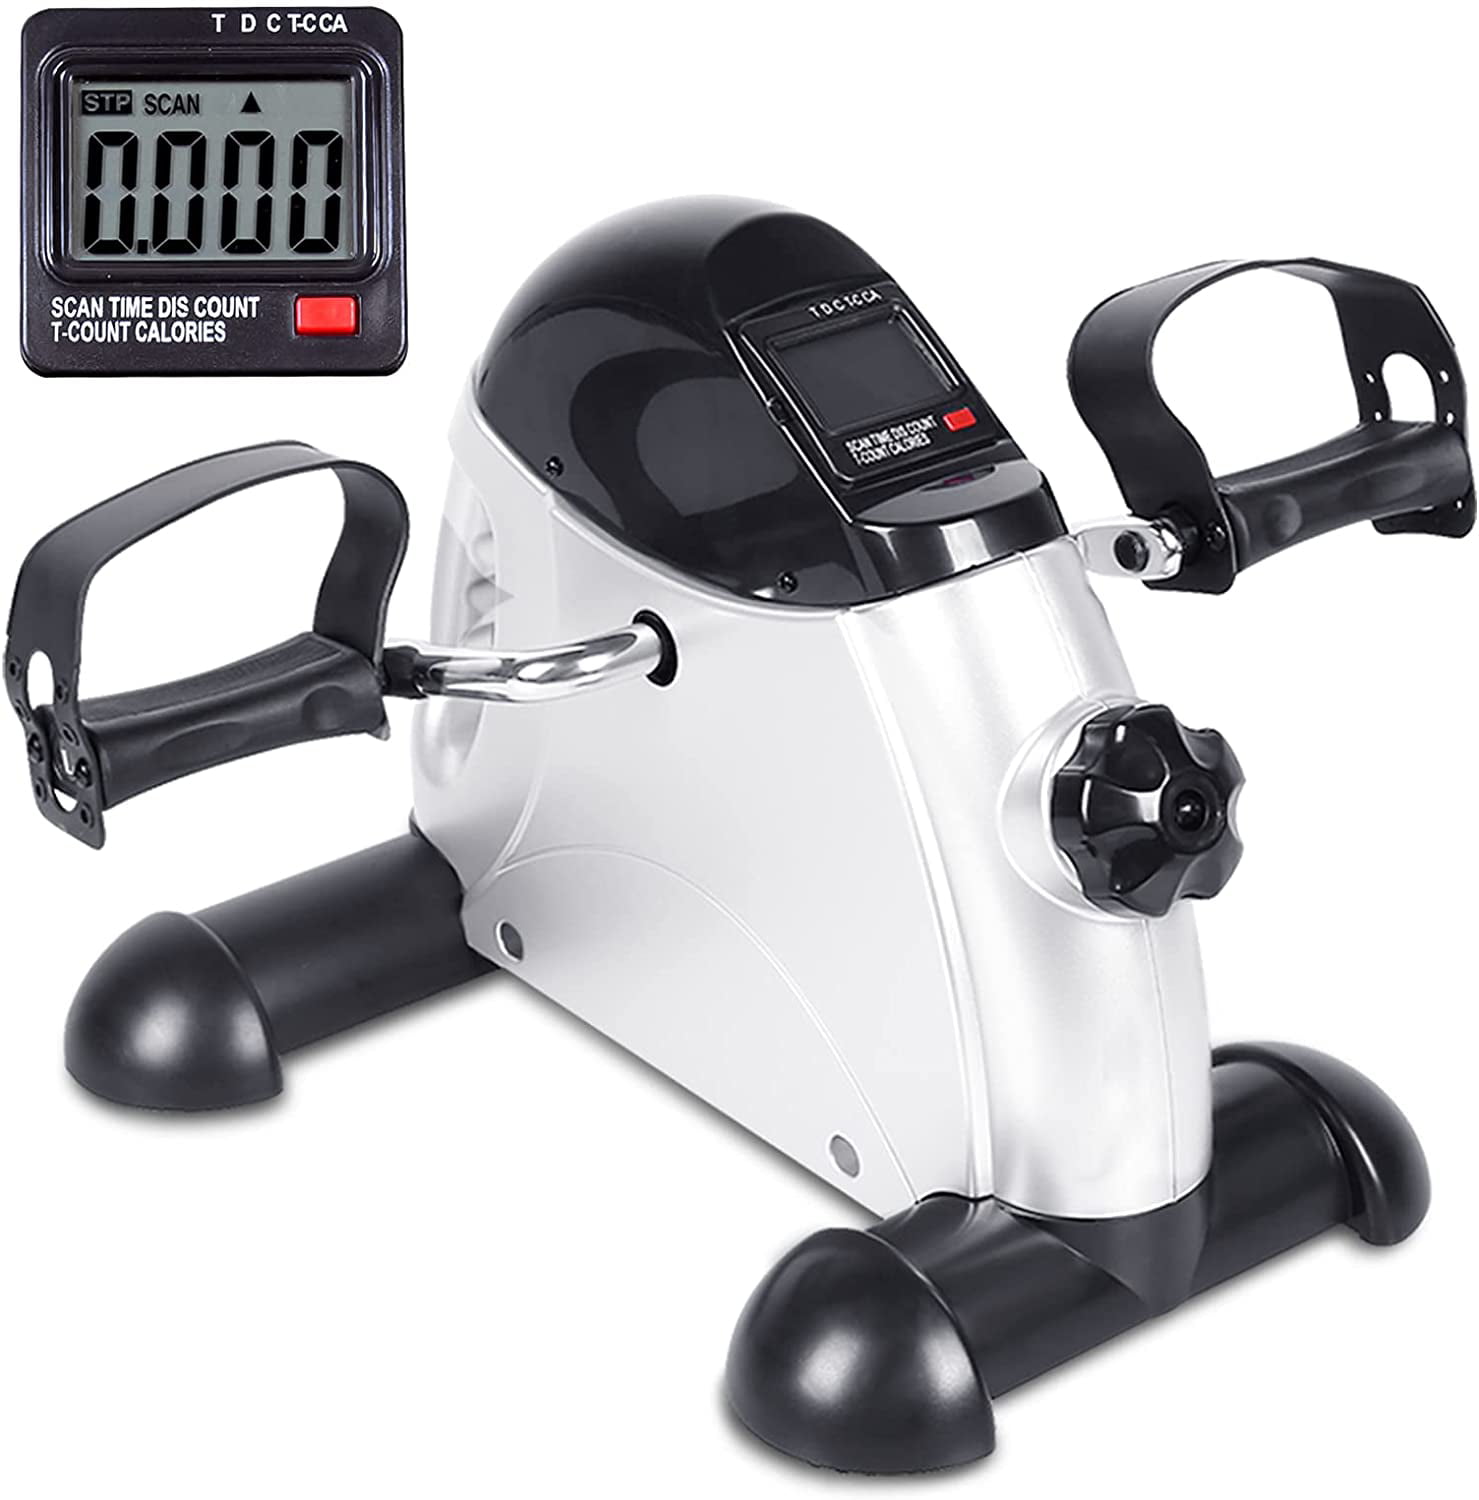 Pedal Exerciser Under Desk Mini Arm Leg Exercise Bike with LCD Screen Display US 